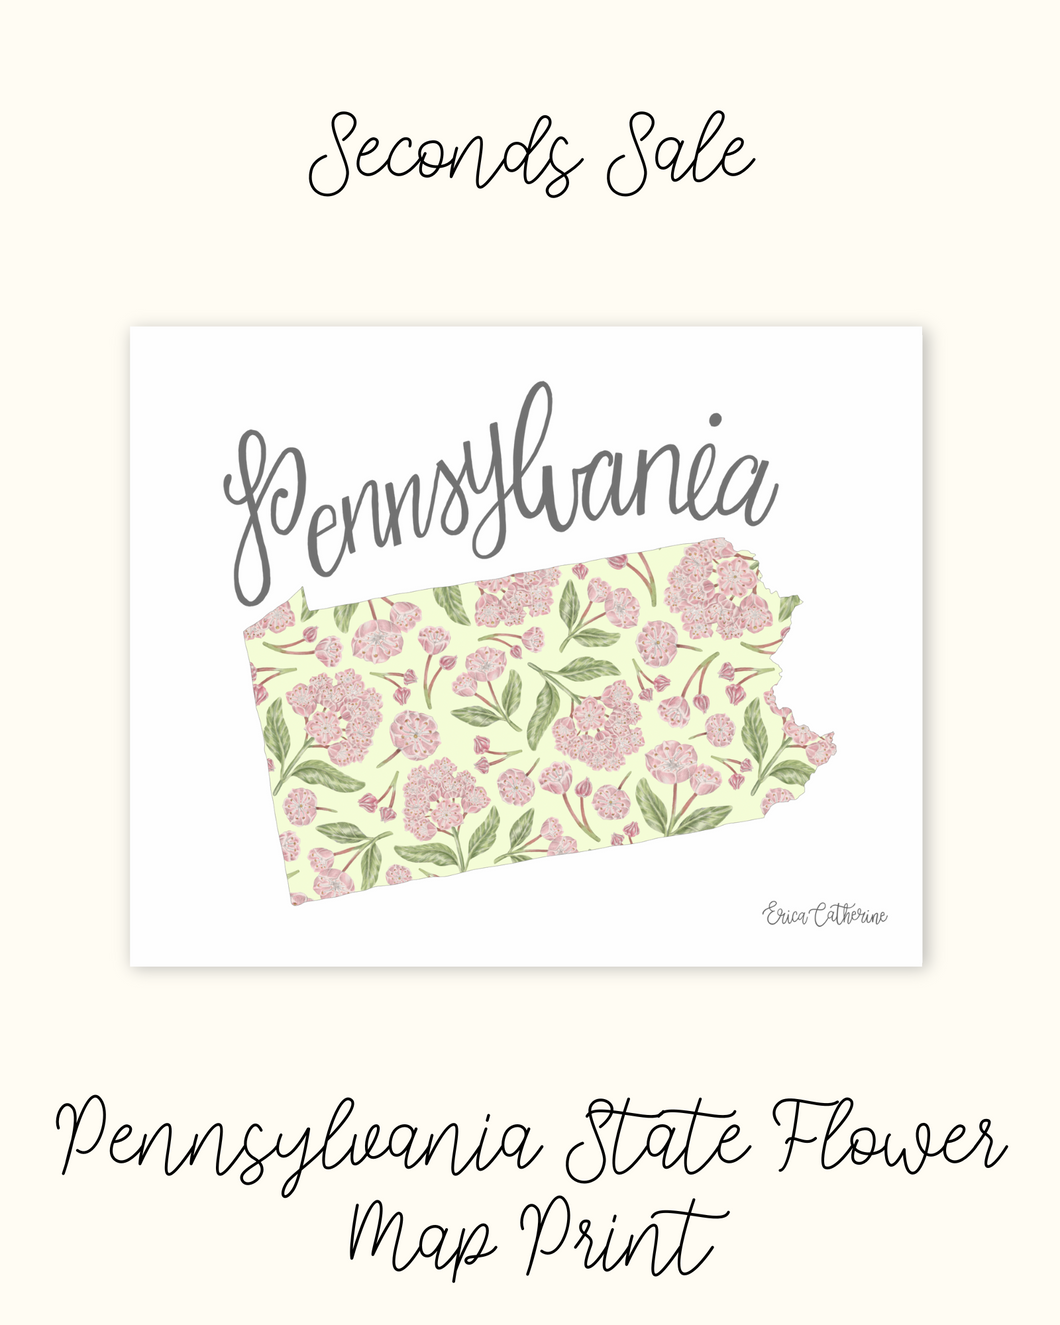 Pennsylvania State Flower Map - Seconds Sale